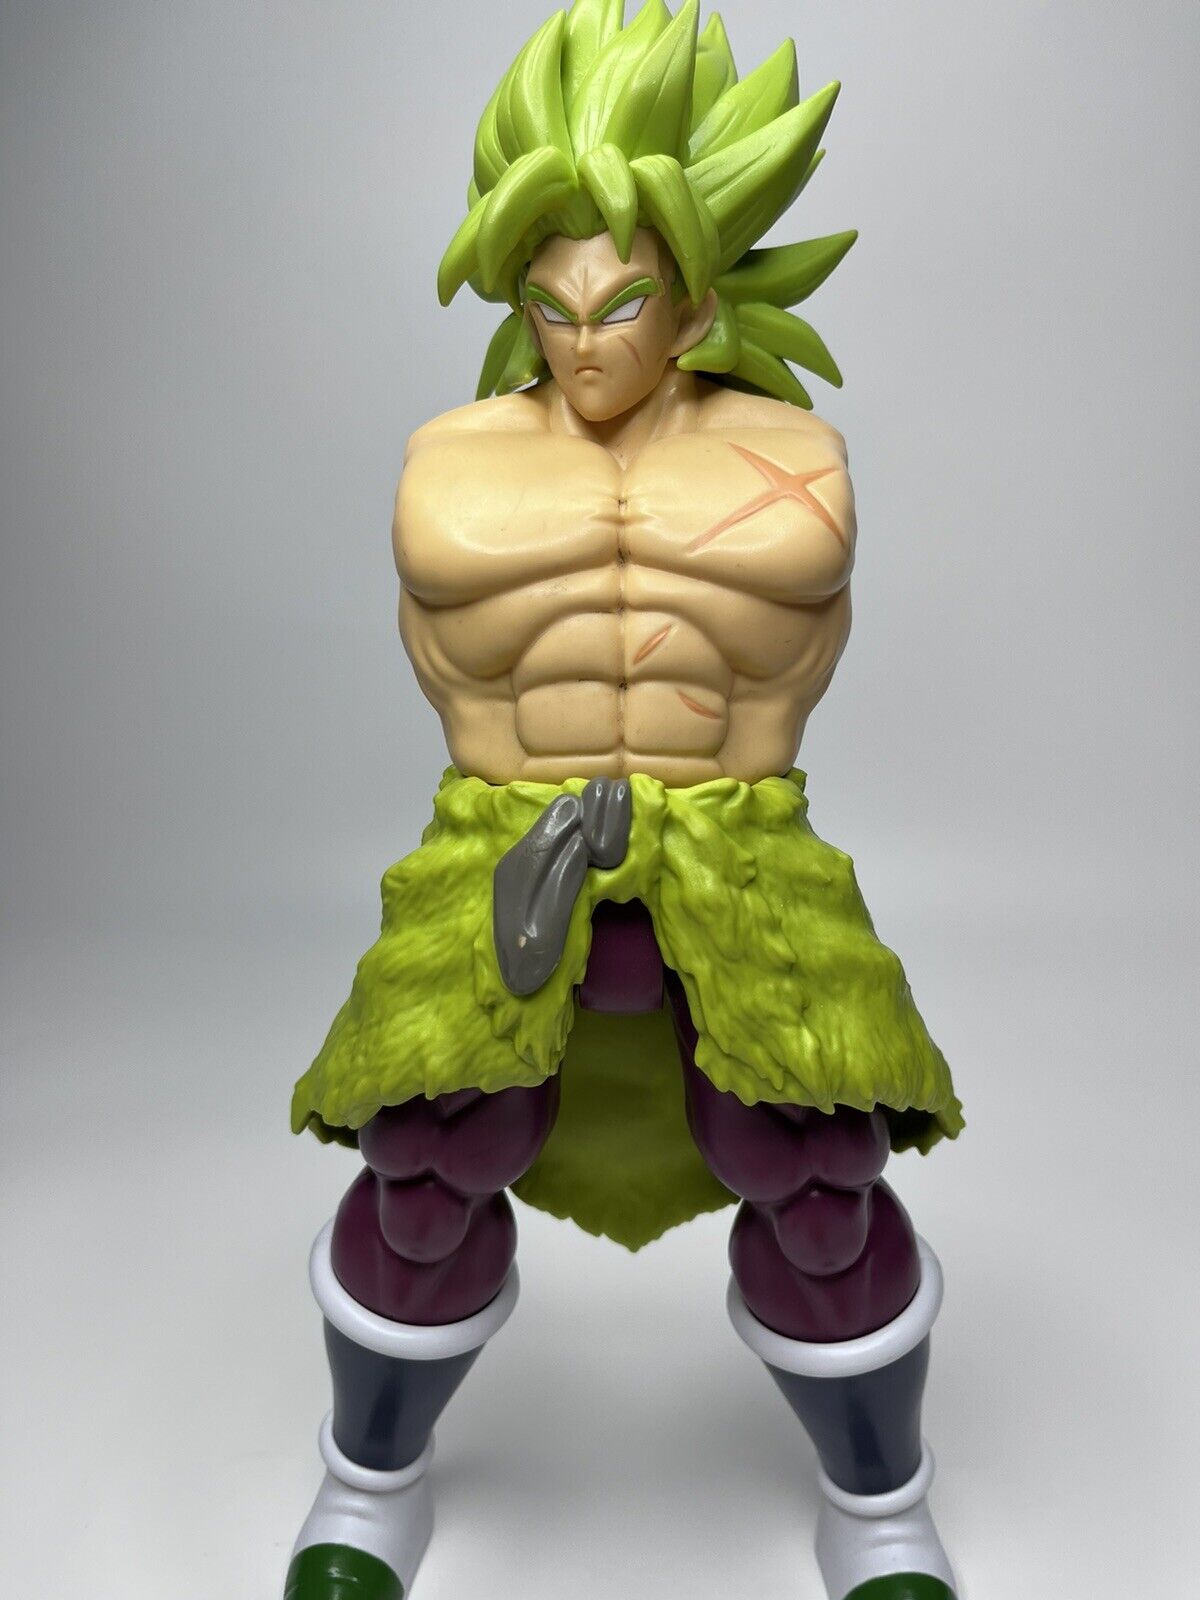 ￼Dragon Ball Z Broly Action Figure￼ 14 In Tall Arms Separated But Included. Used